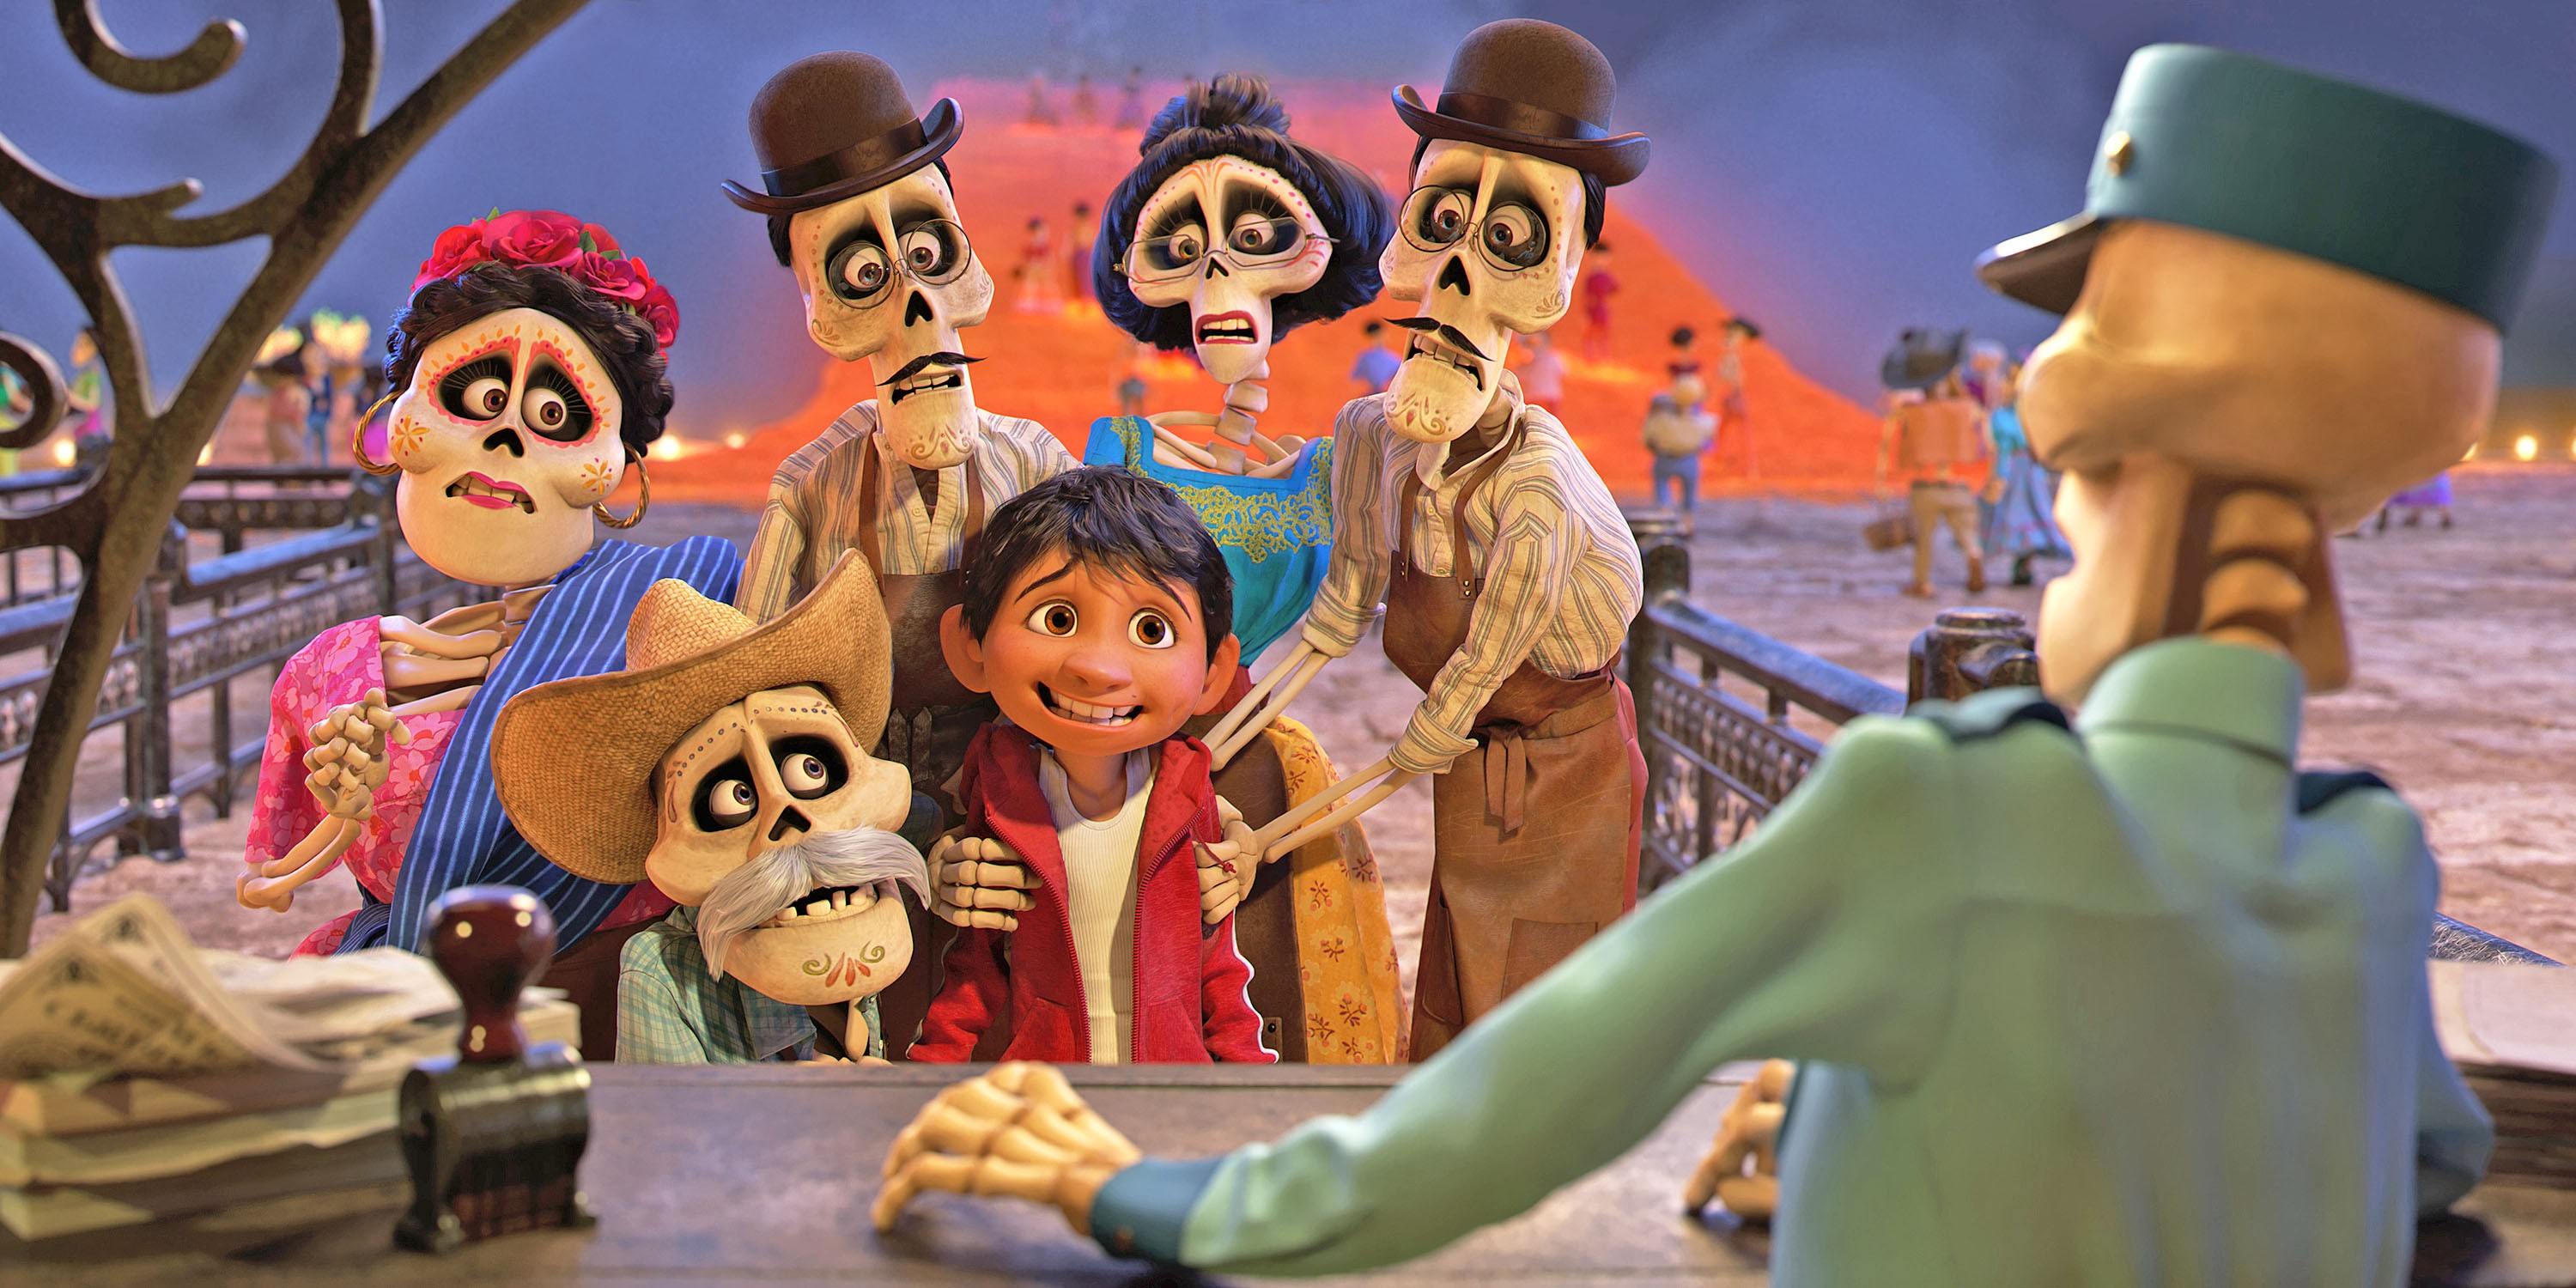 Coco' is a gorgeous, touching animated adventure for the whole family, Movies, San Luis Obispo